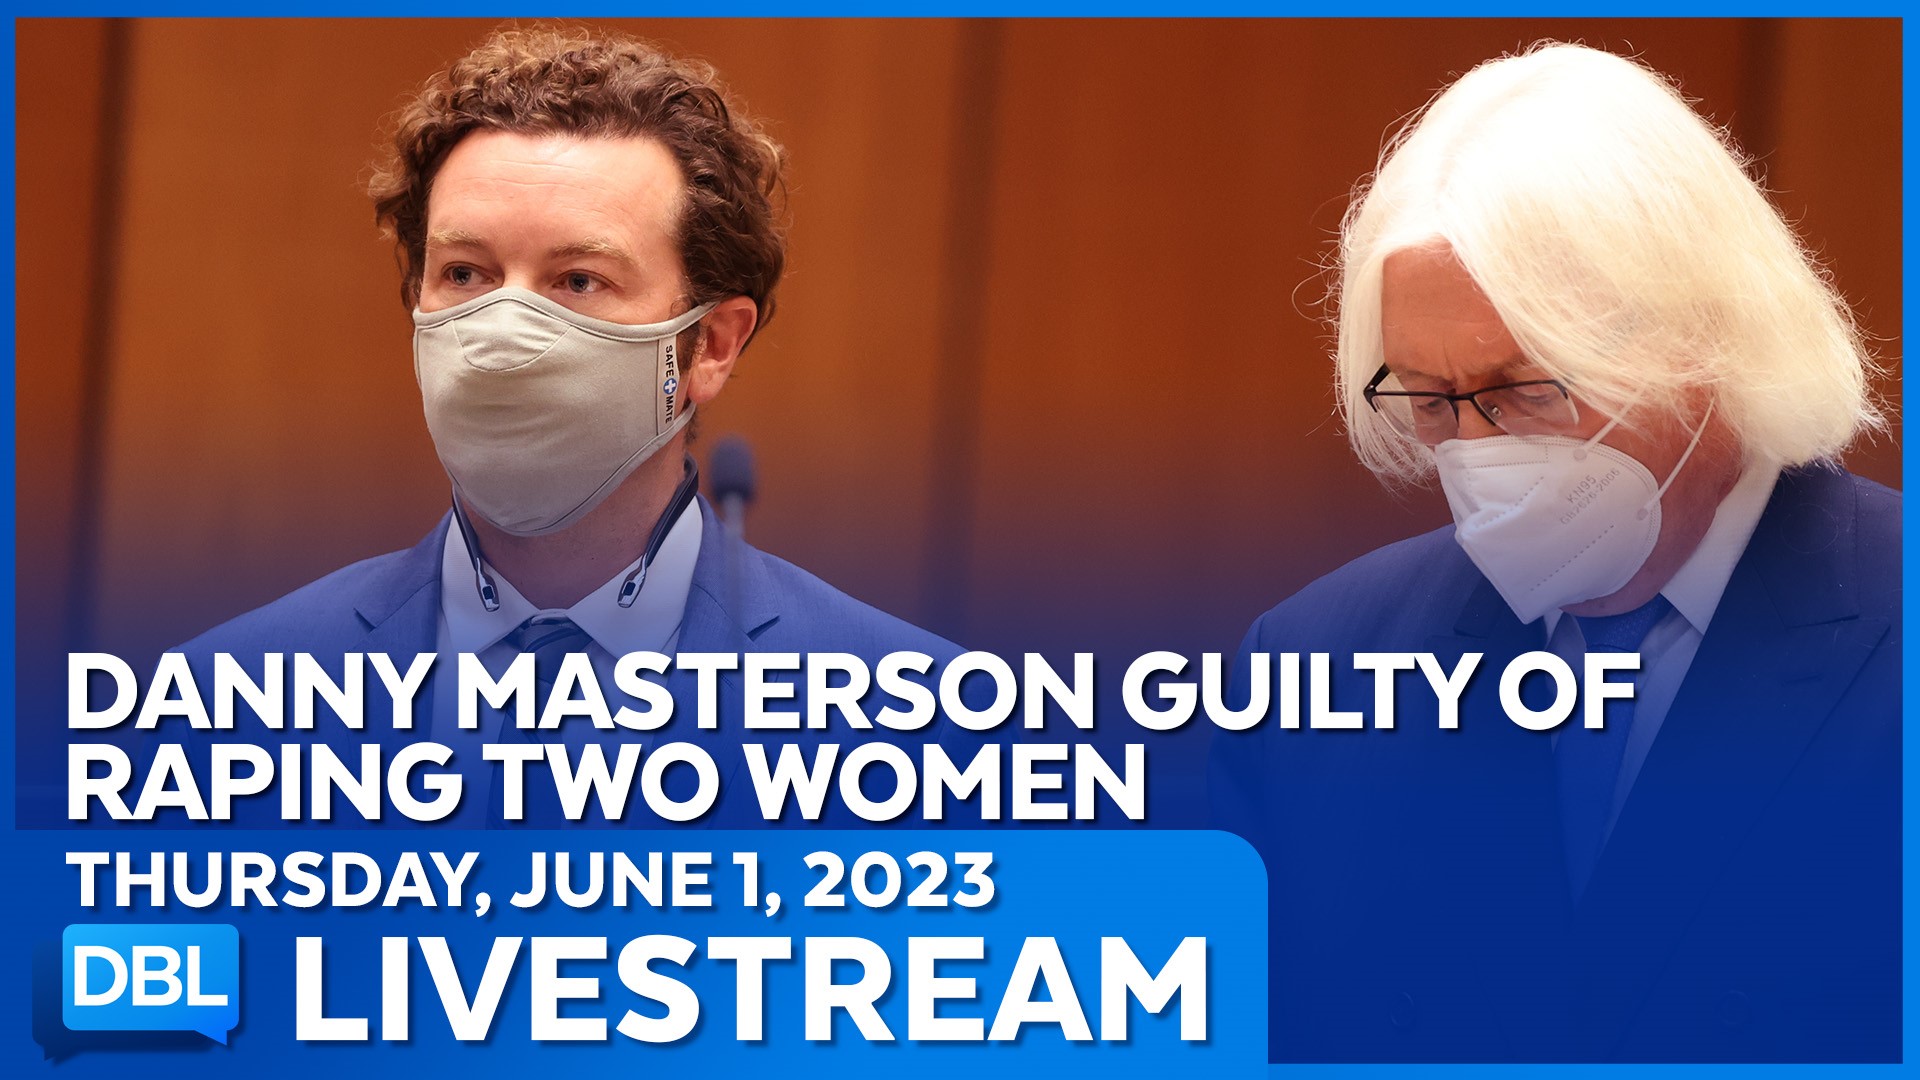 After being found guilty of rape, Danny Masterson faces 30 years in prison. Pride month kicks off today as the war on businesses rages on. What does LGBTQIAP+ mean?